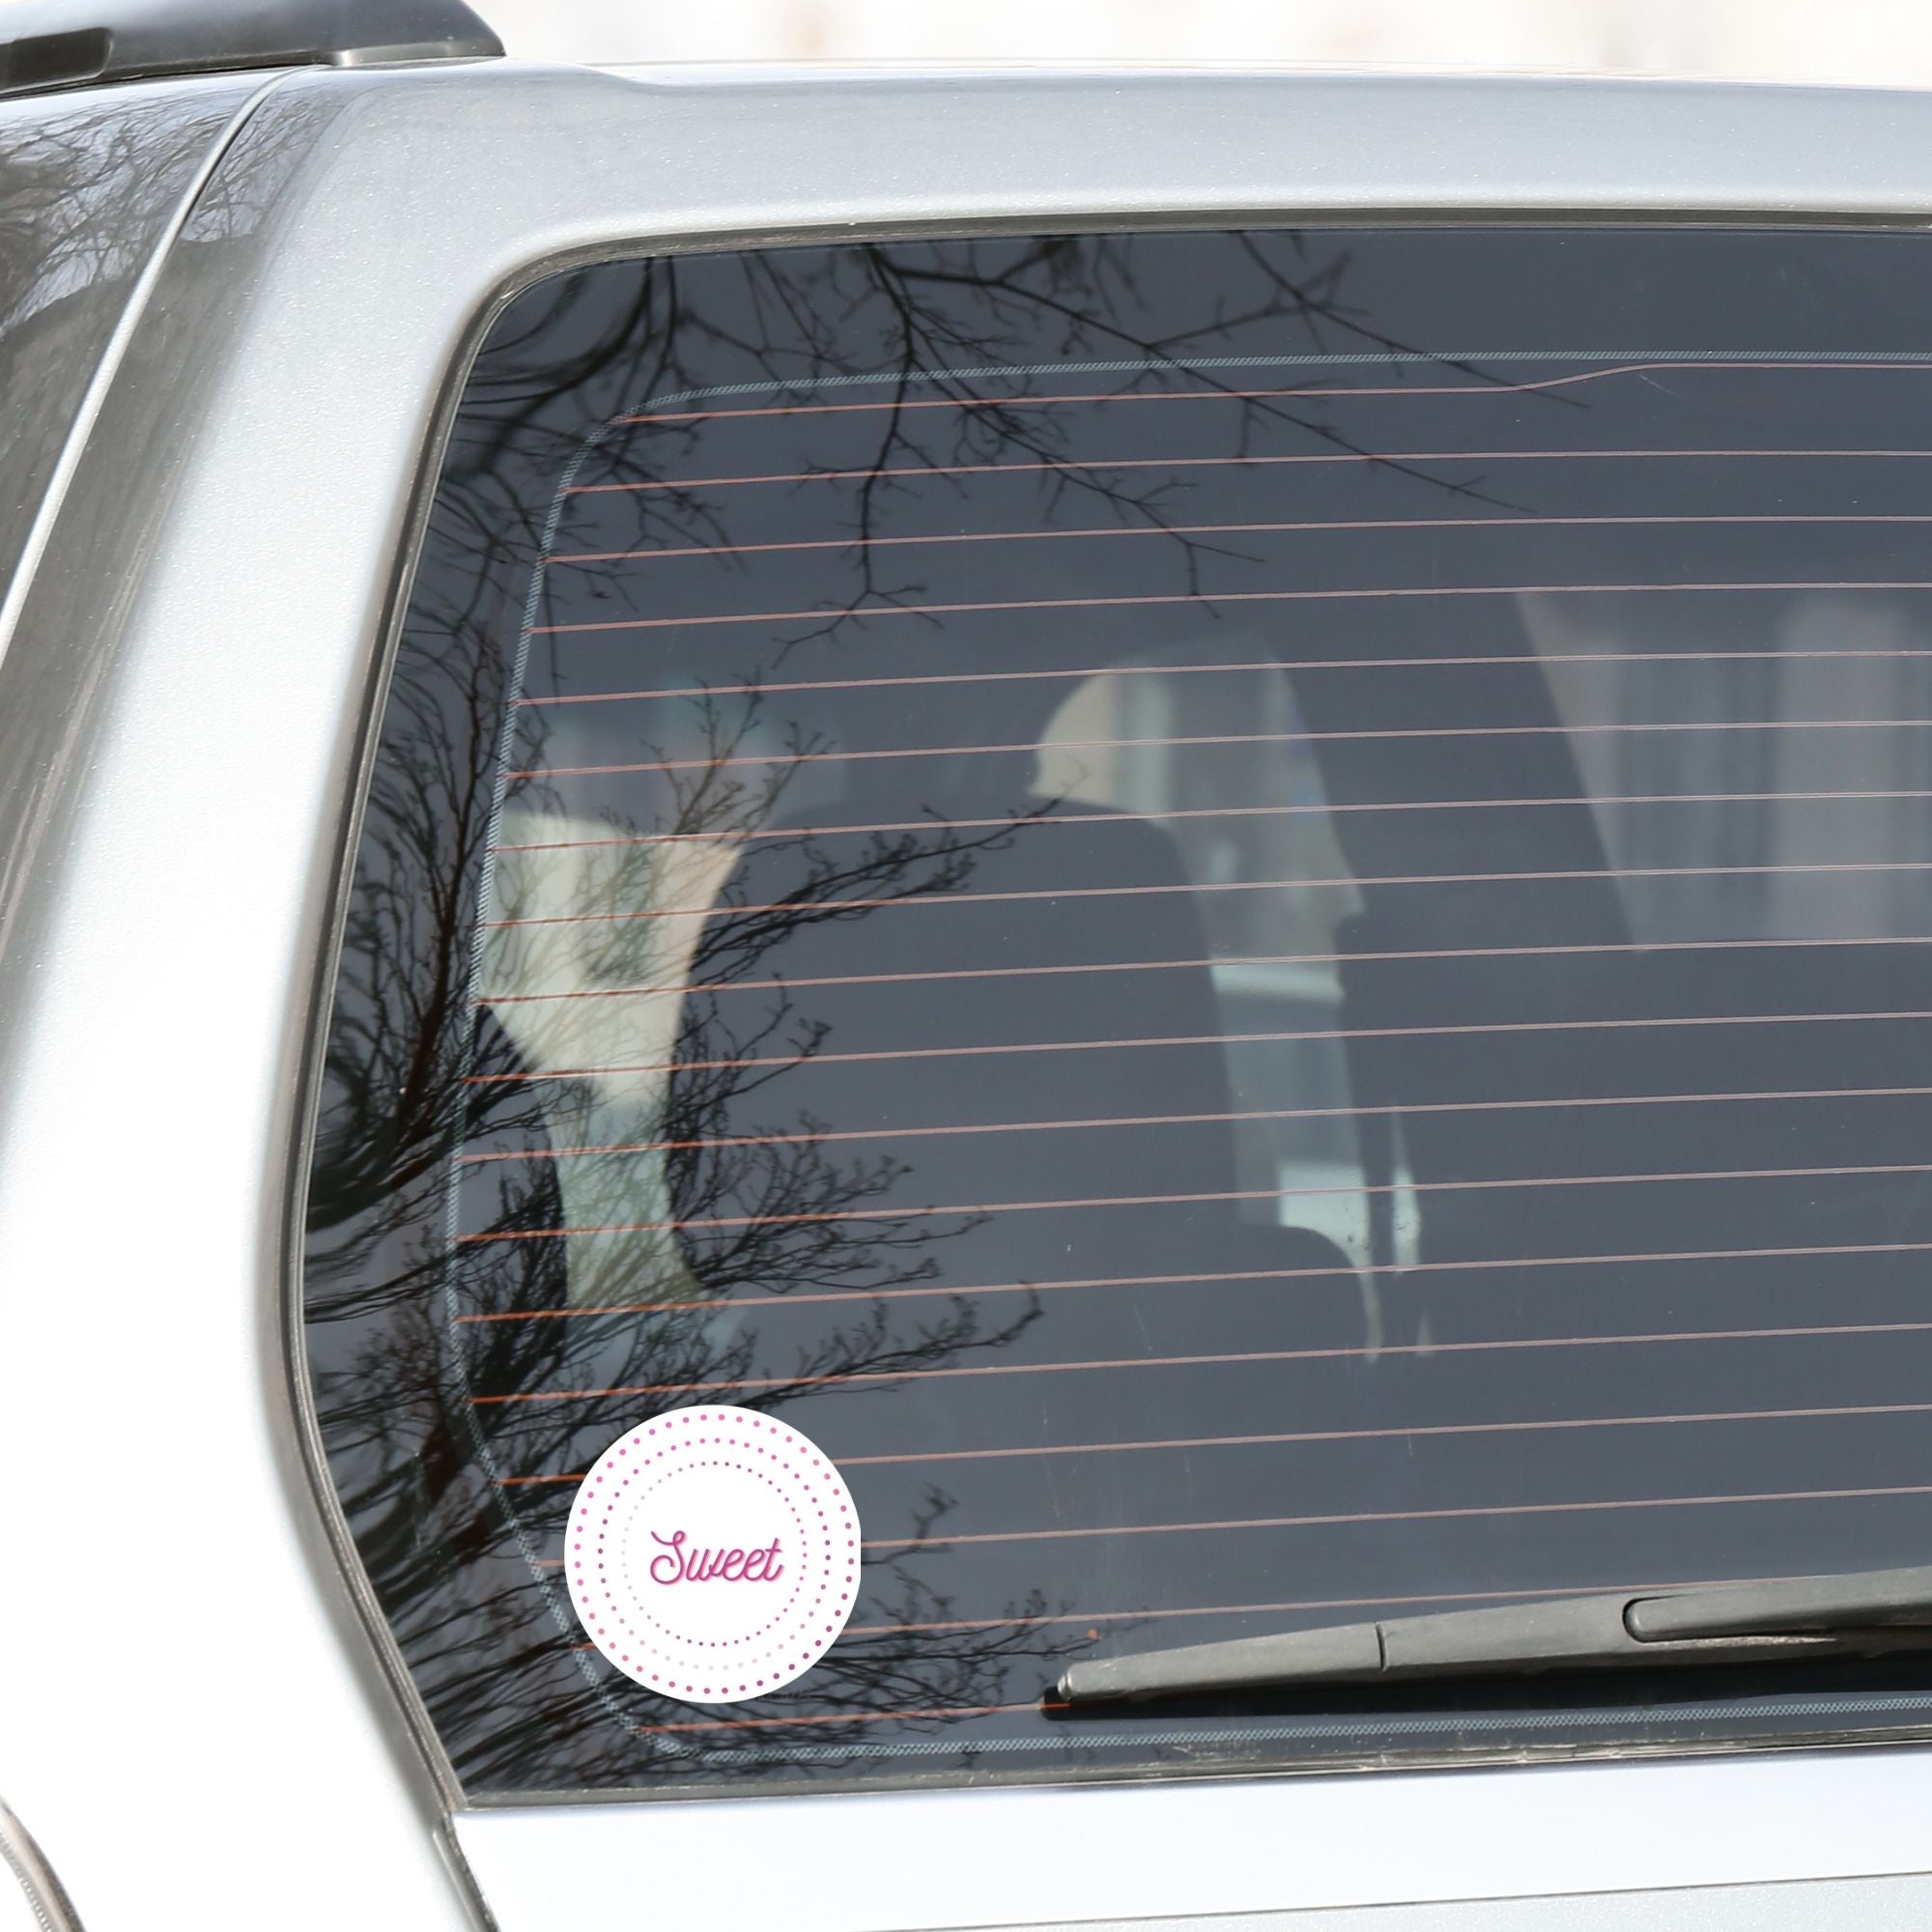 This round individual die-cut sticker is Sweet! It features the word Sweet in the center surrounded by pink and purple circular dots. This makes a great gift for anyone you're sweet on! This image shows the Sweet sticker on the back window of a car.